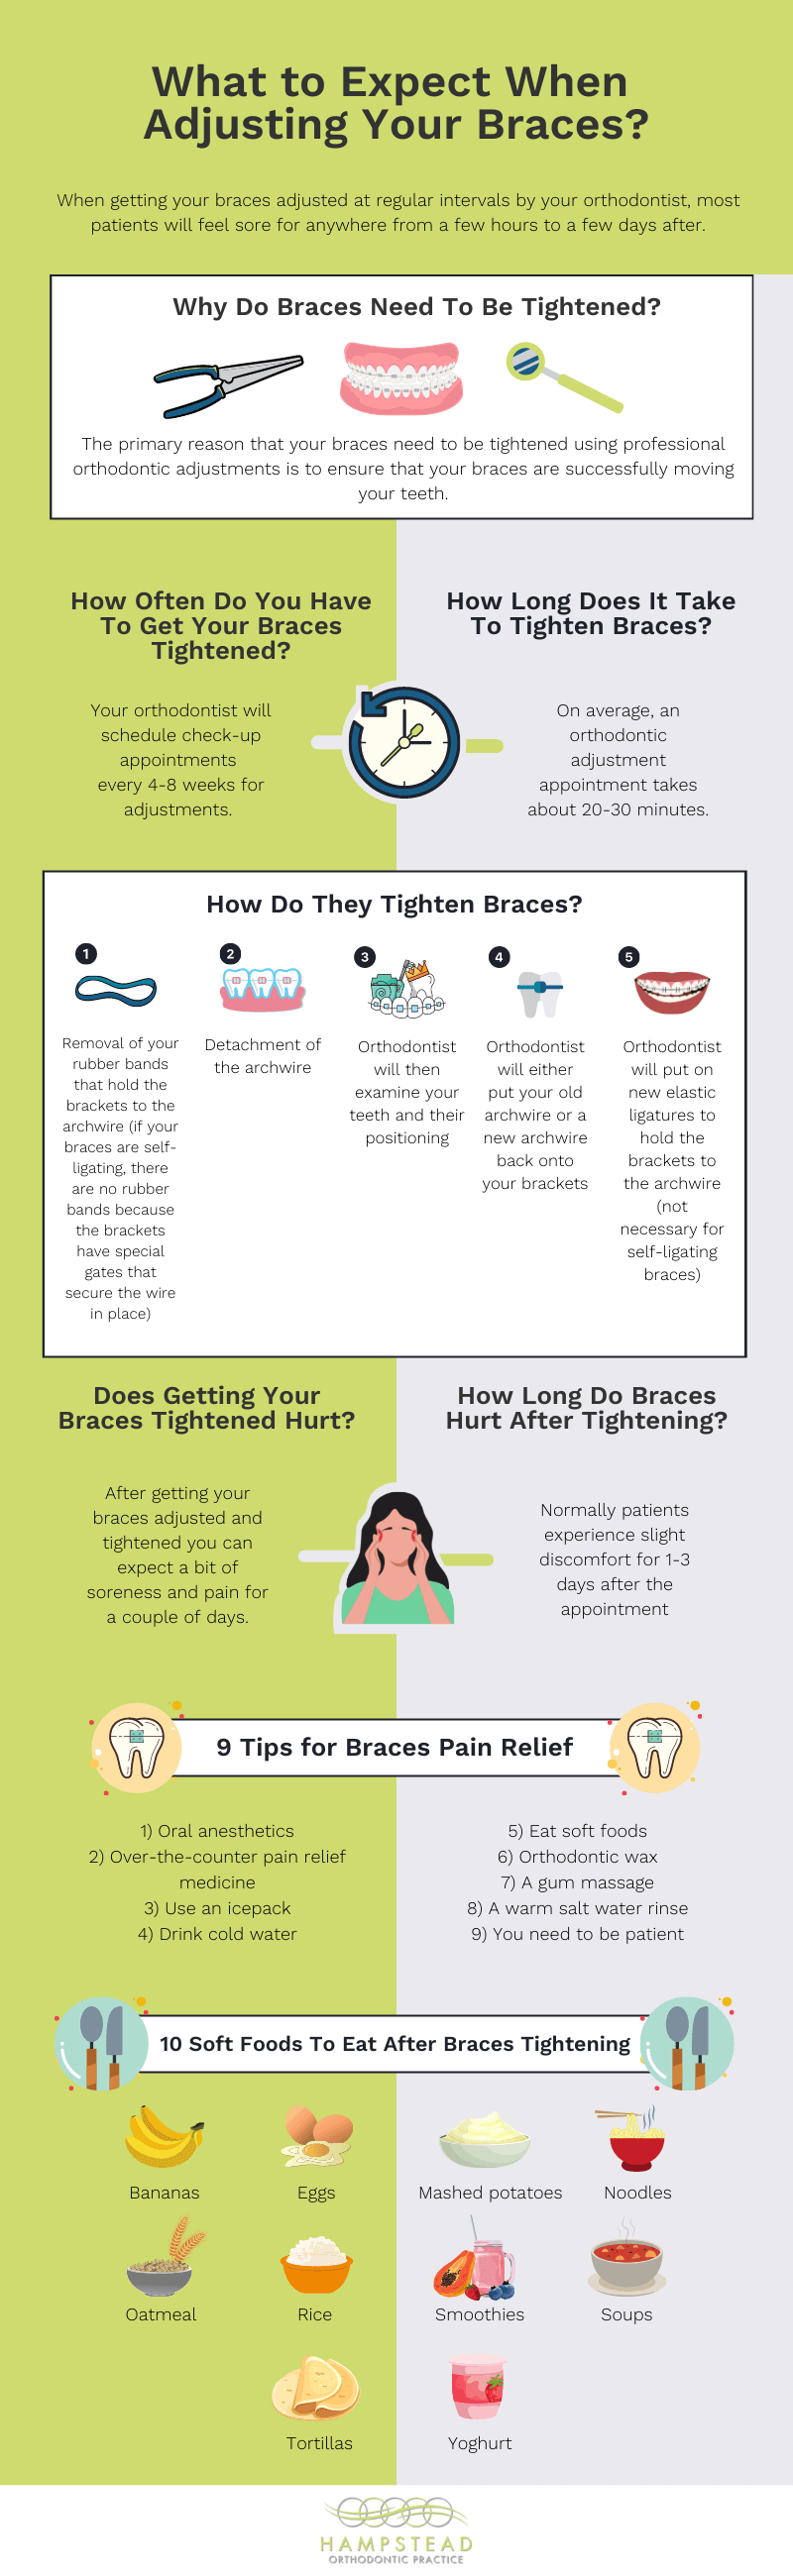 What to Expect When Adjusting Your Braces? Infographic